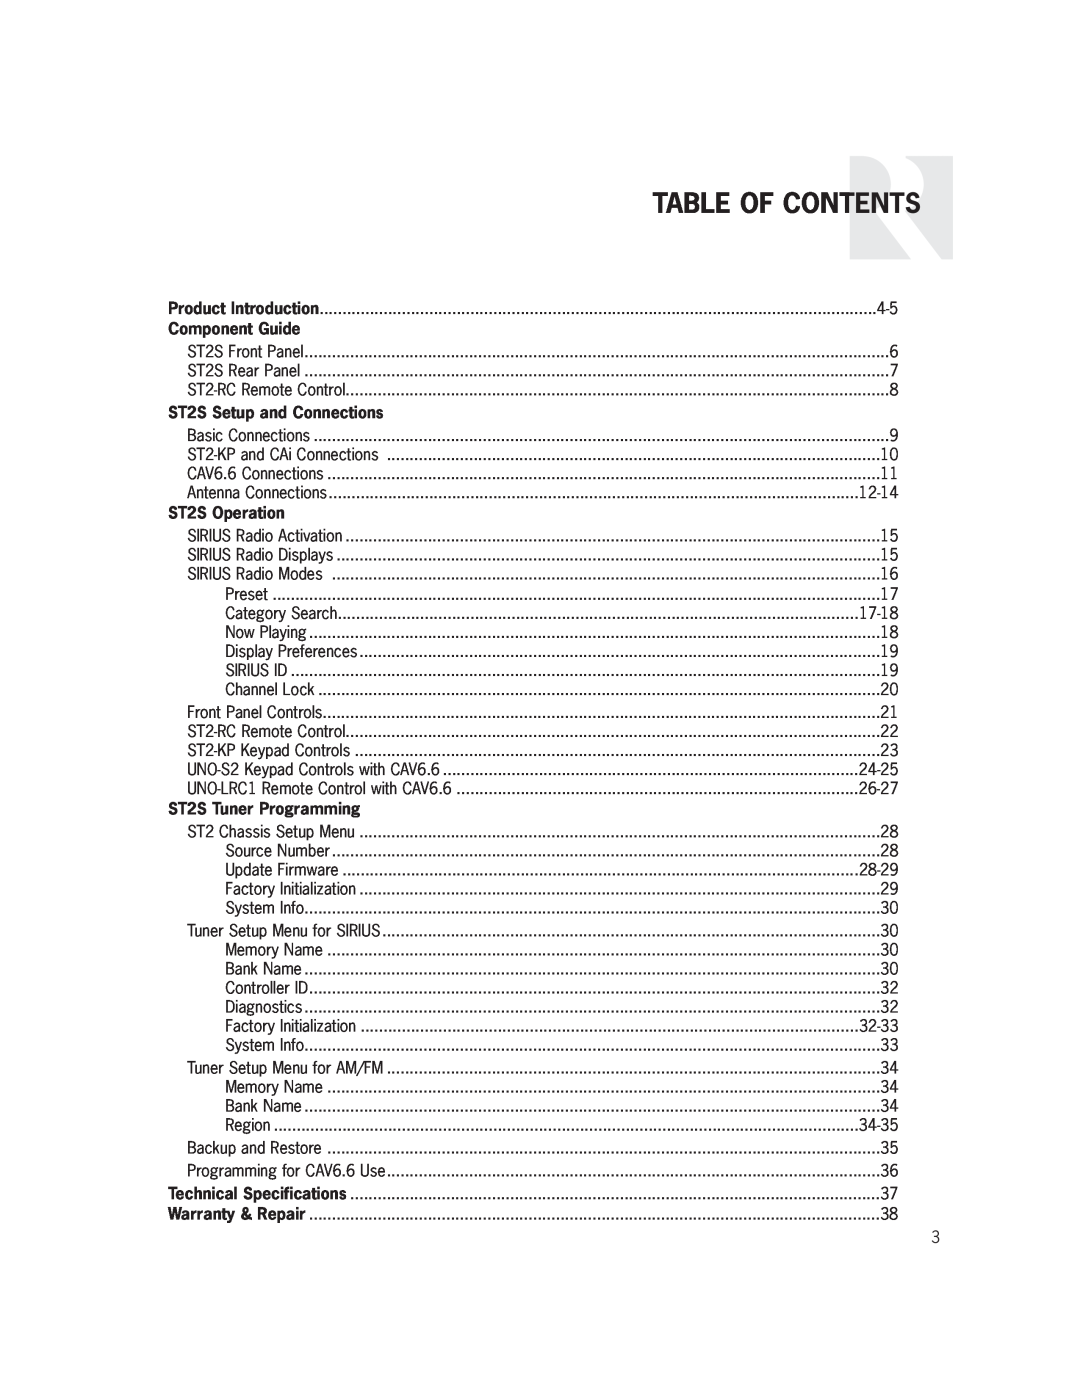 Russound Table Of Contents, Component Guide, ST2S Setup and Connections, ST2S Operation, ST2S Tuner Programming 